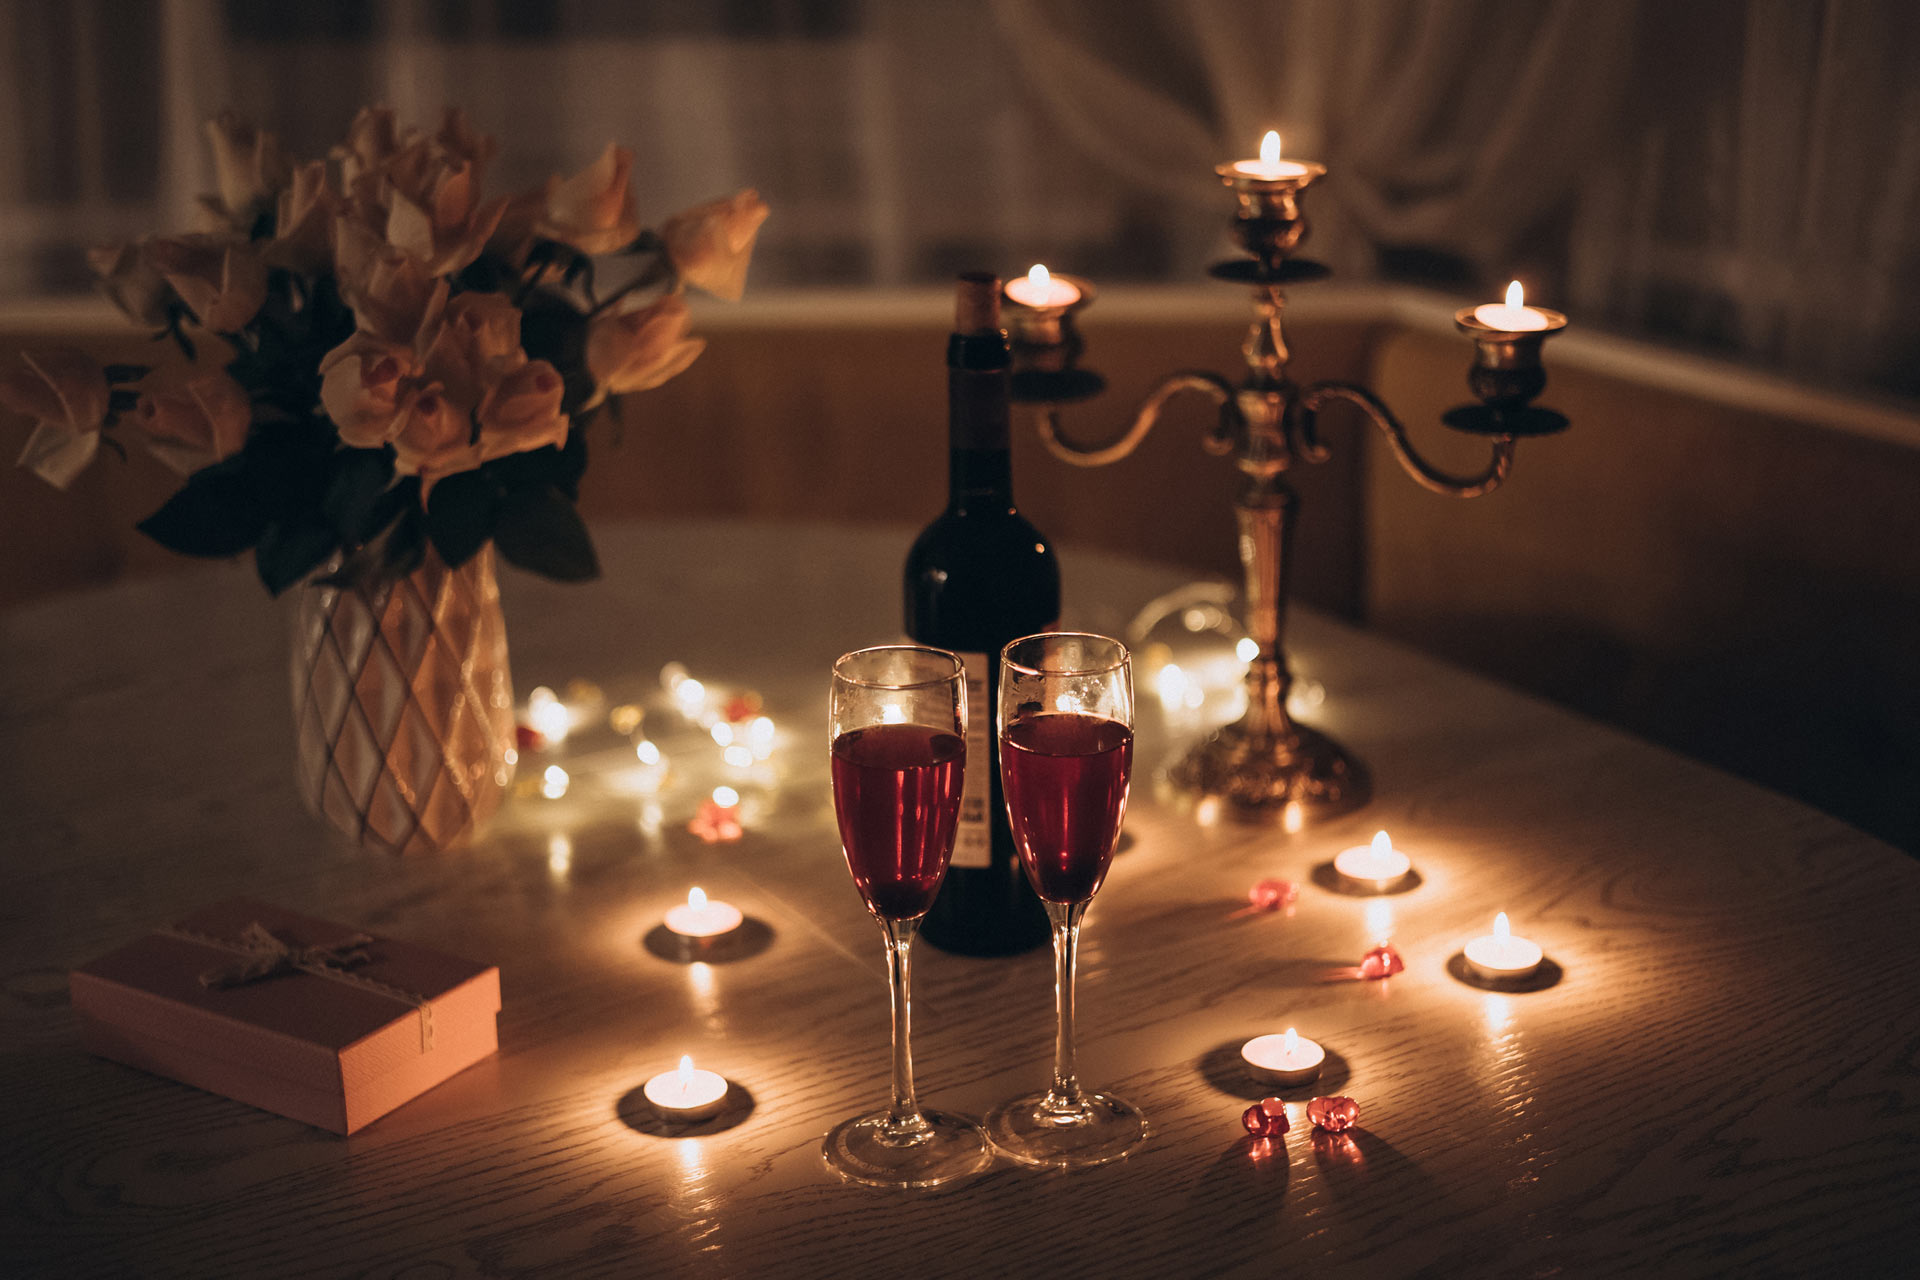 Romantic dinner with candles and wine